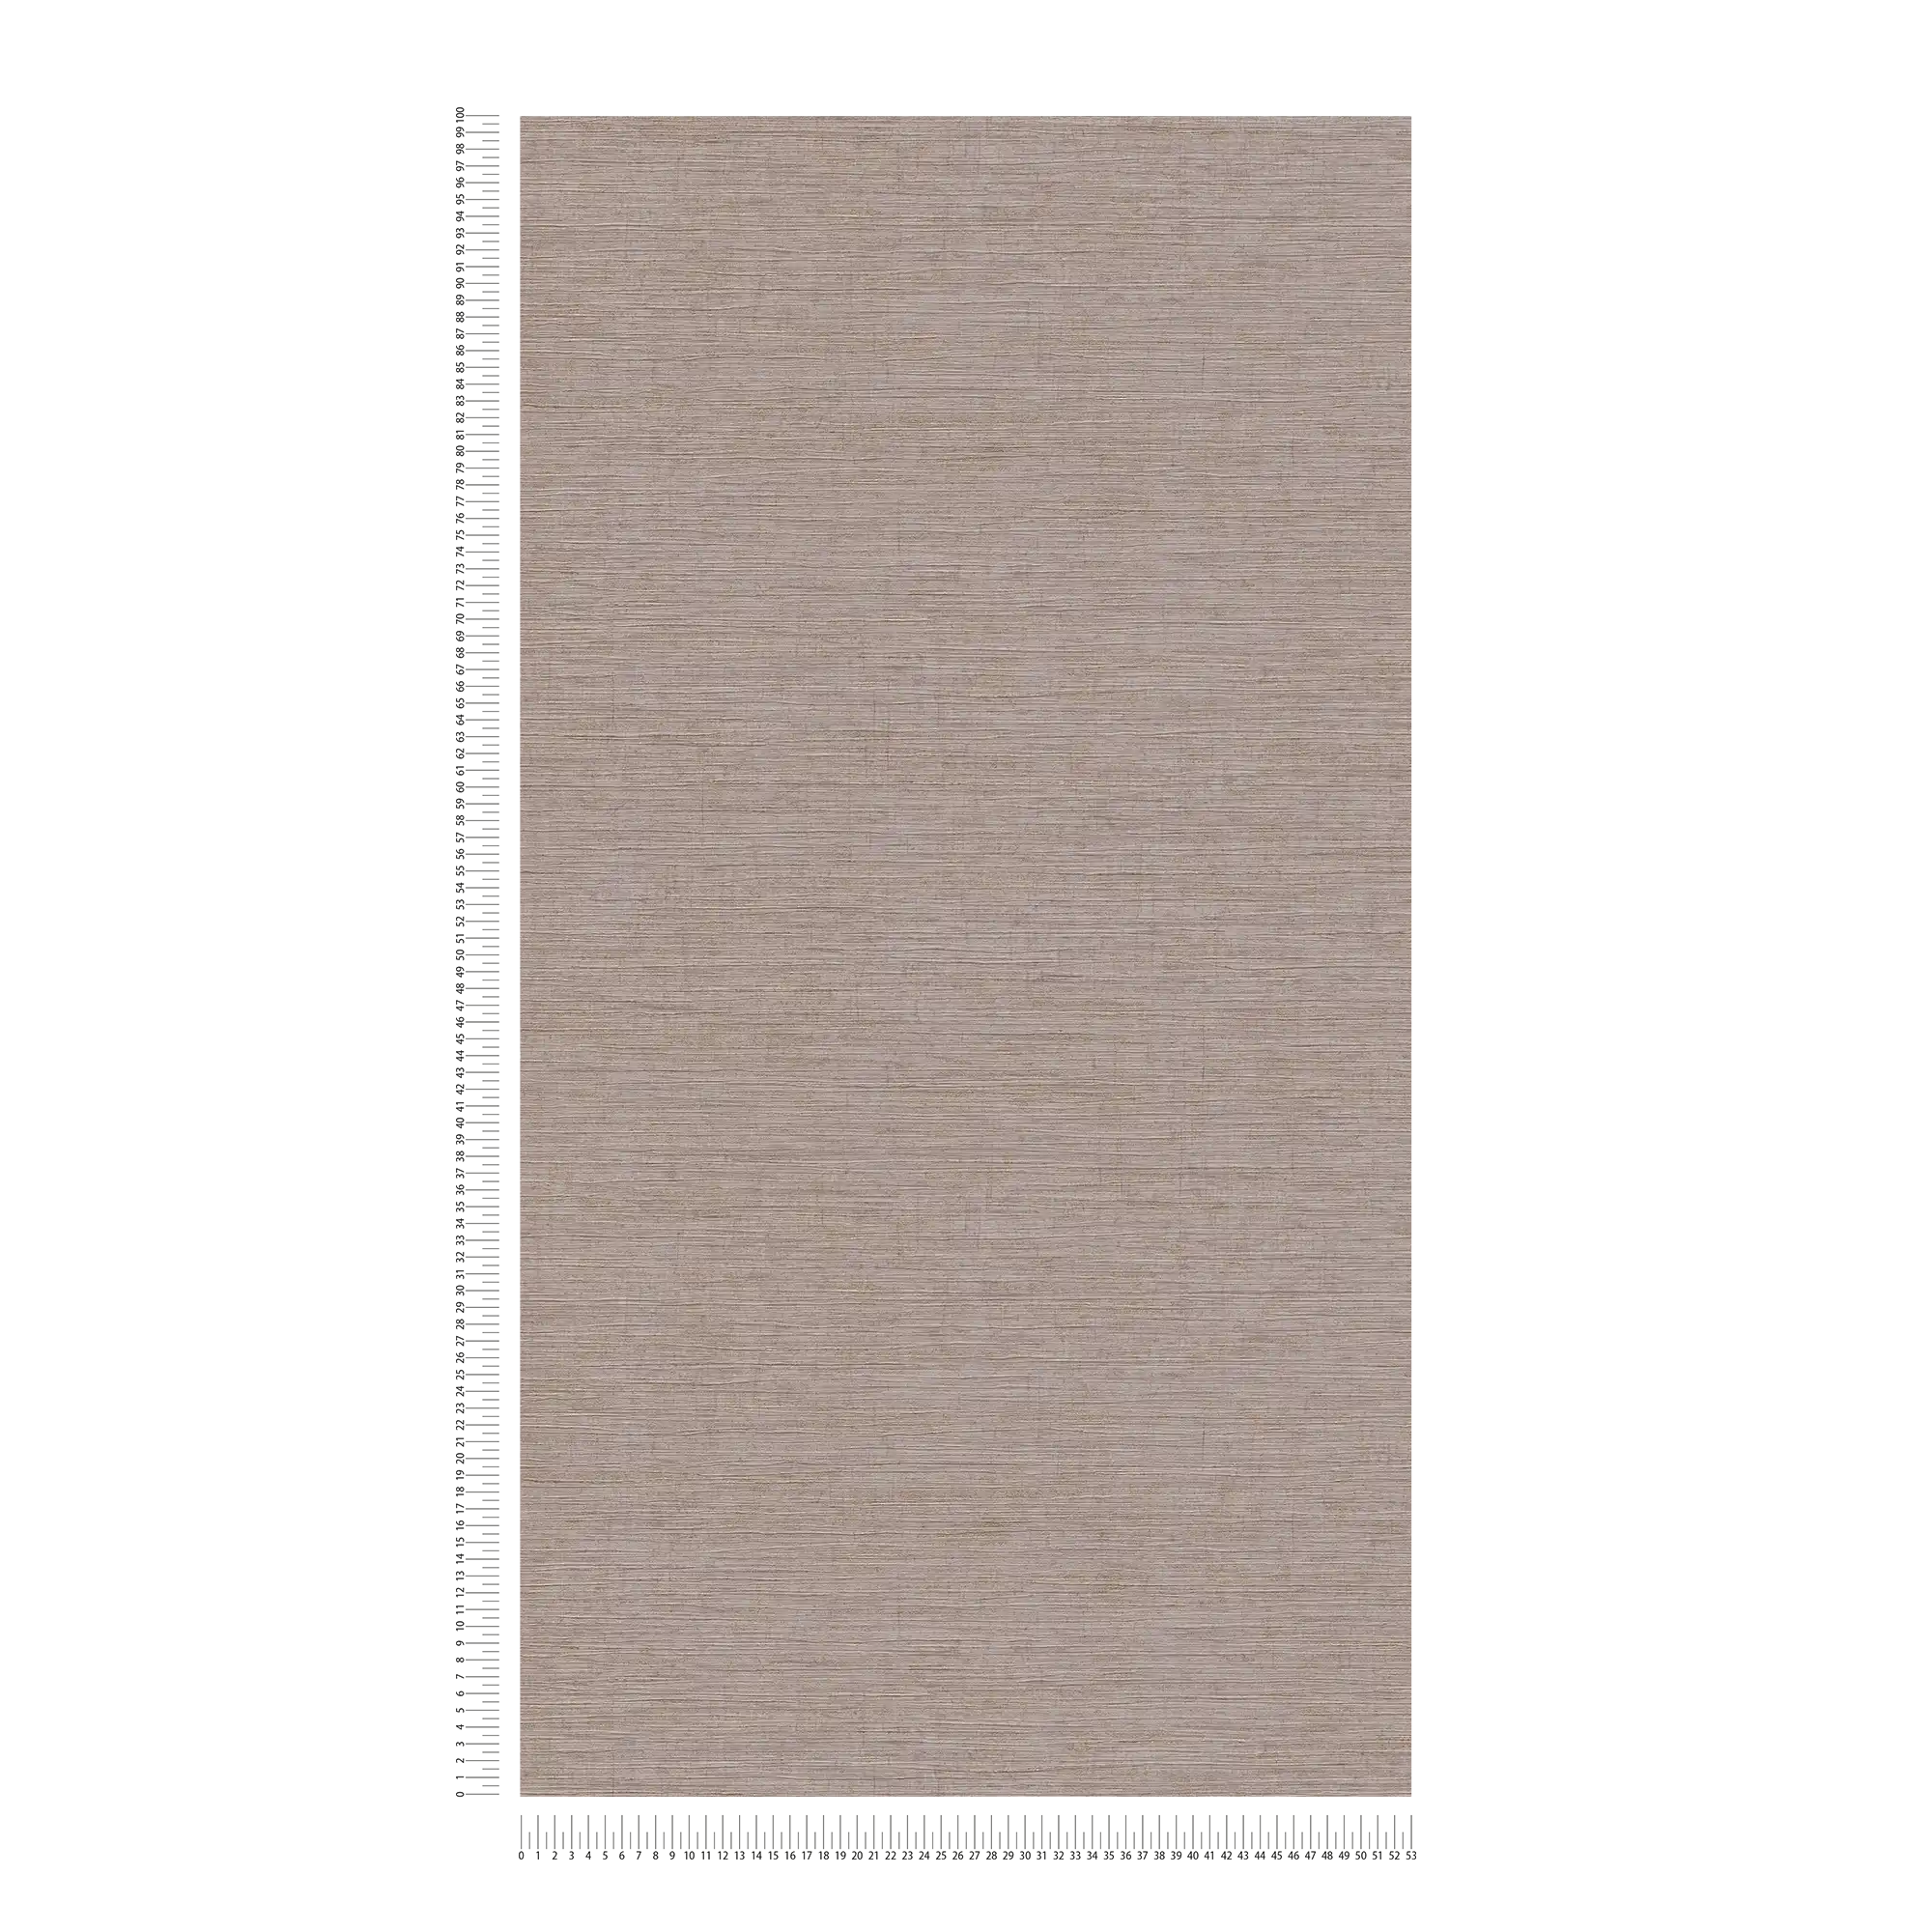             Wallpaper with embossed pattern for textile look - Brown, Metallic
        